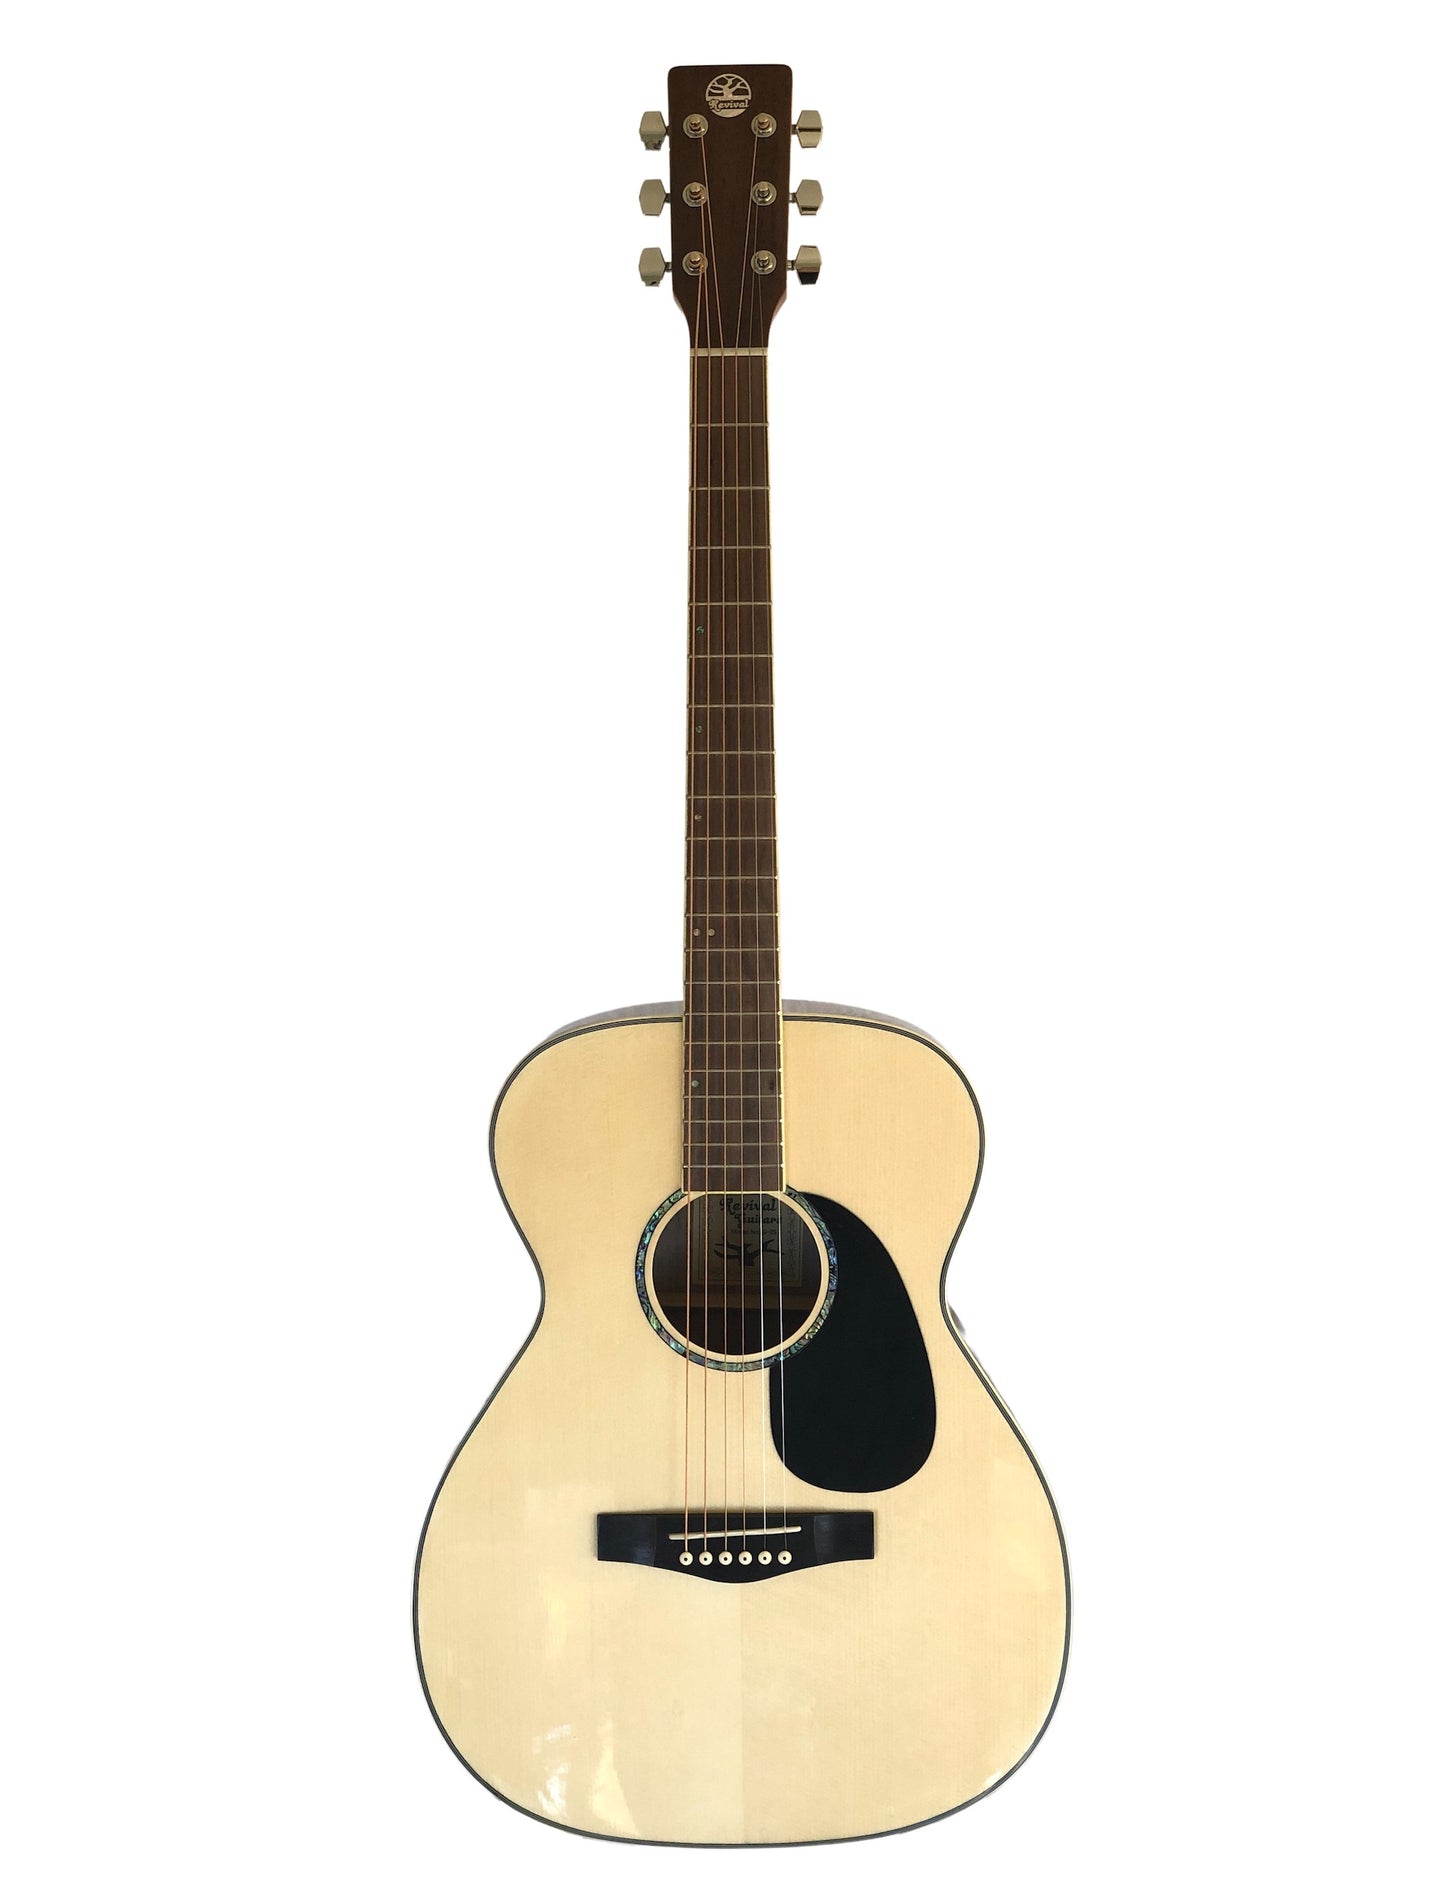 Photo of the Revival RG-25 acoustic guitar, from the front, full body